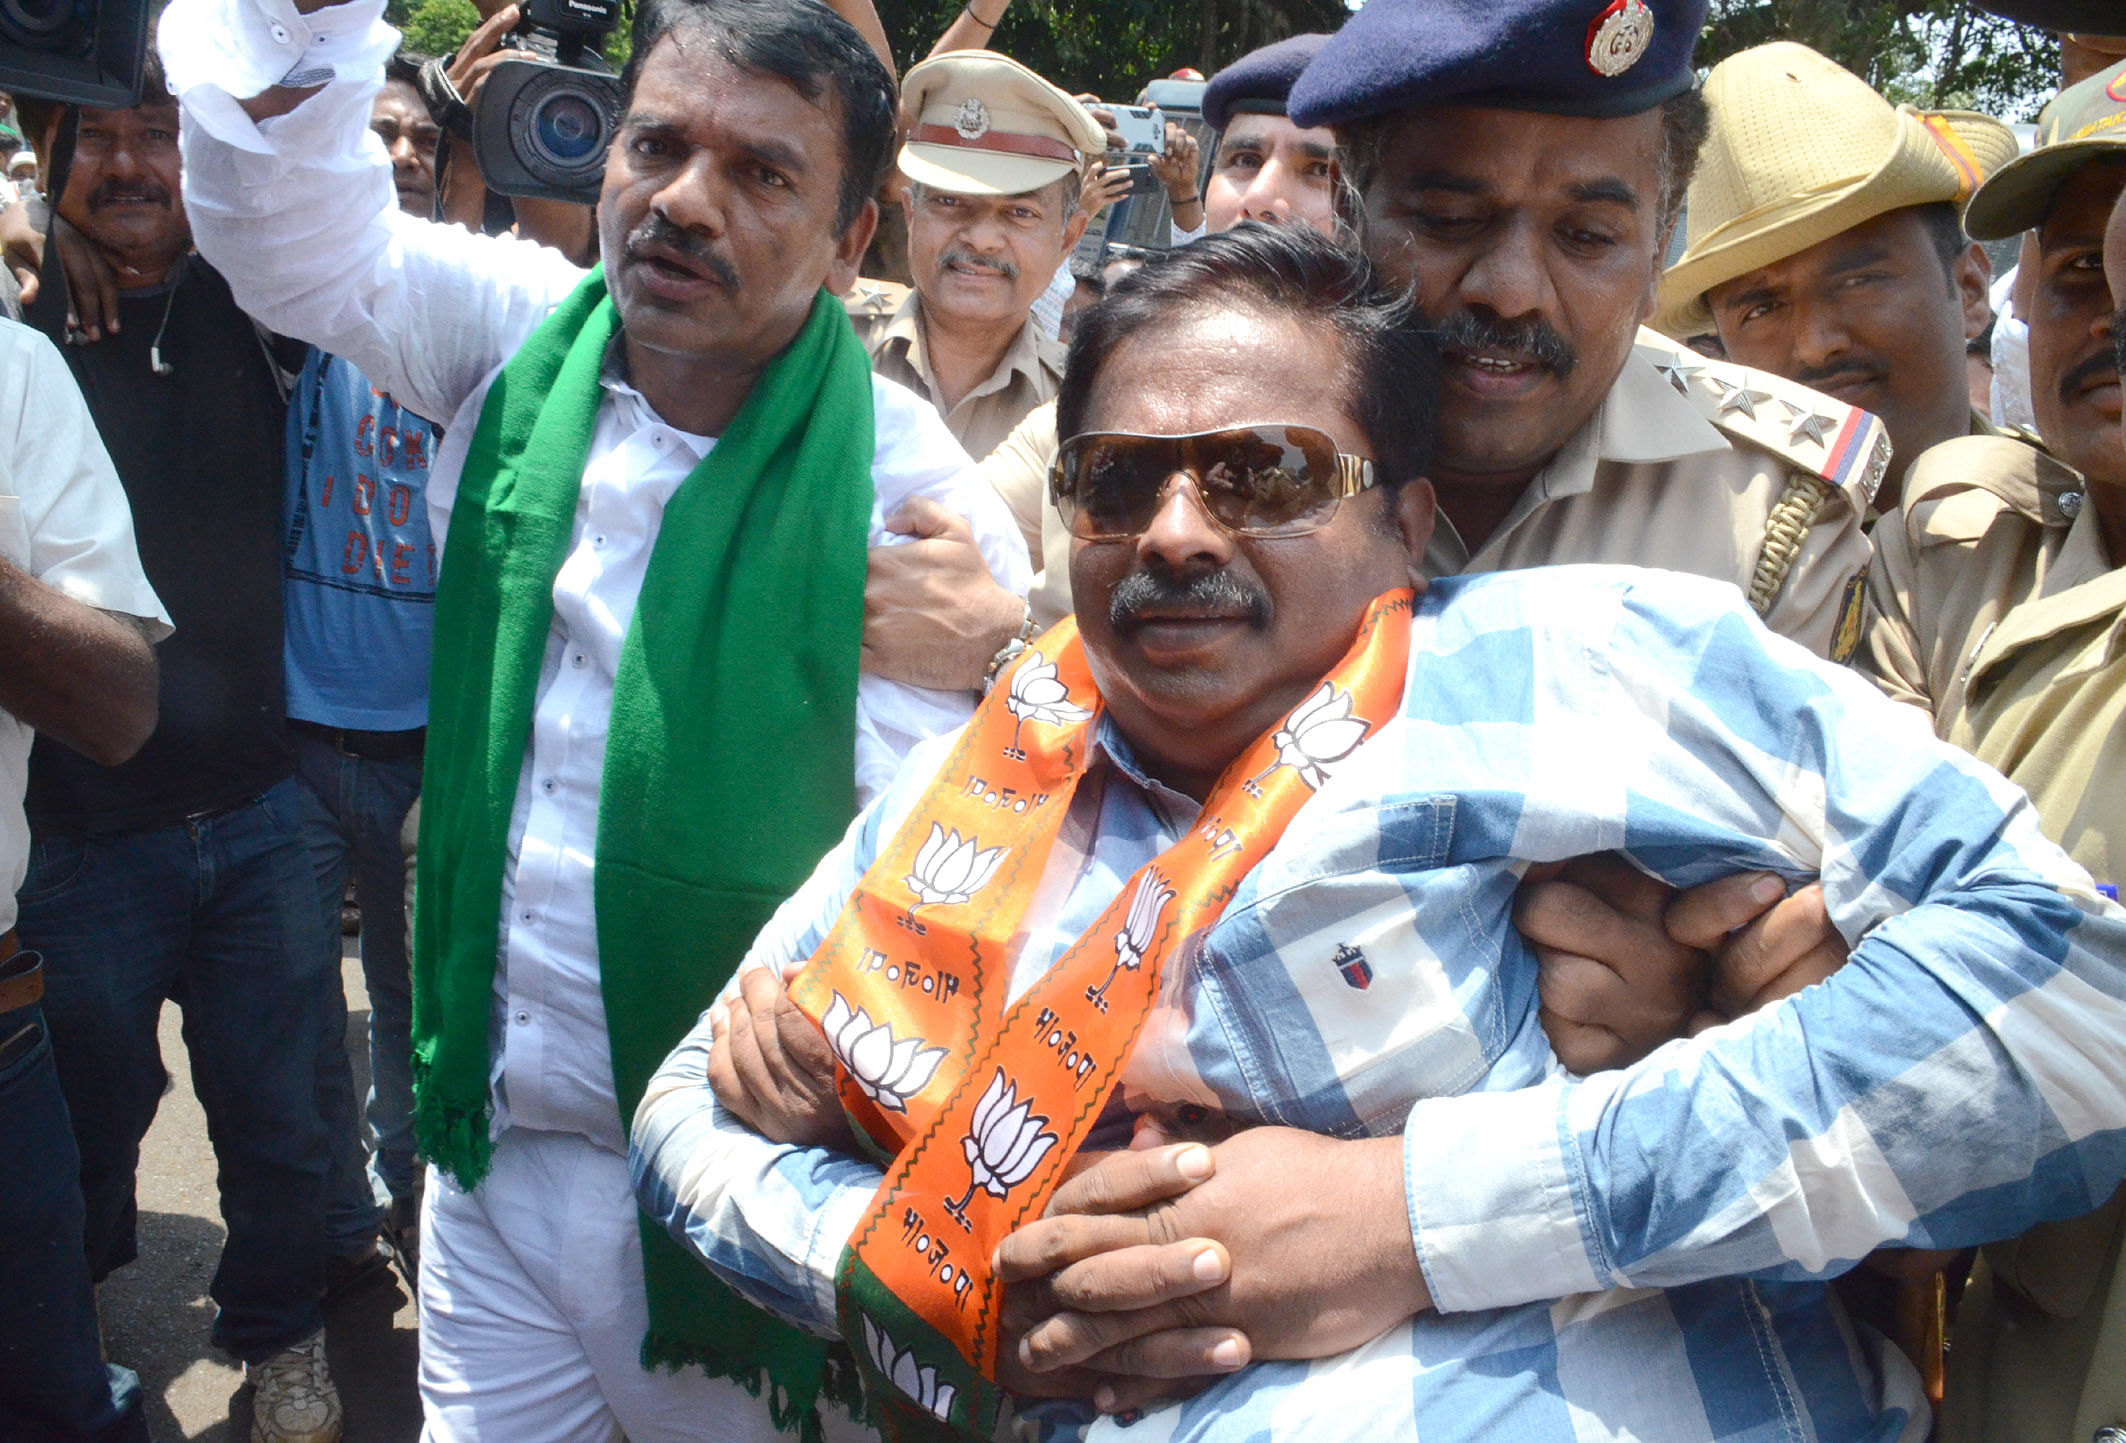 BJP MLAs Abhay Patil and Anil Benke being detained by police during bandh call given by BJP demanding waiver of farmers loans and staging sit-in protest at Channamma Circle in Belagavi on Monday. (DH Photo)